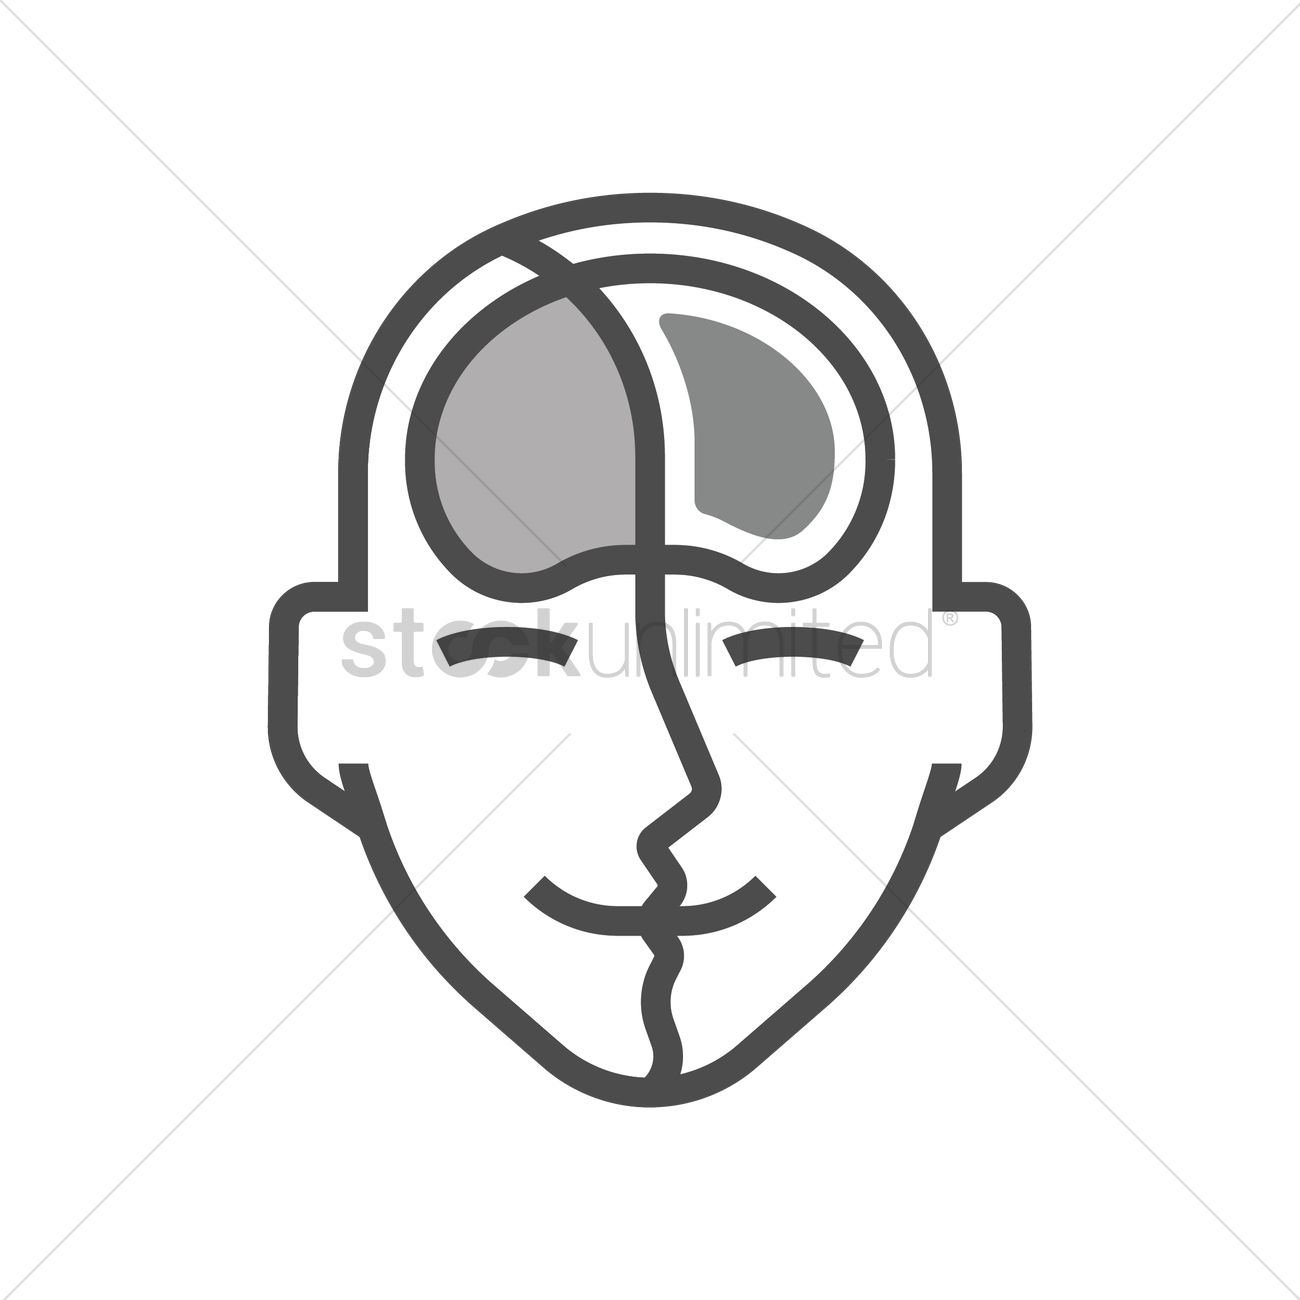 Individual Personality Icon - Business  Finance Icons in SVG and 